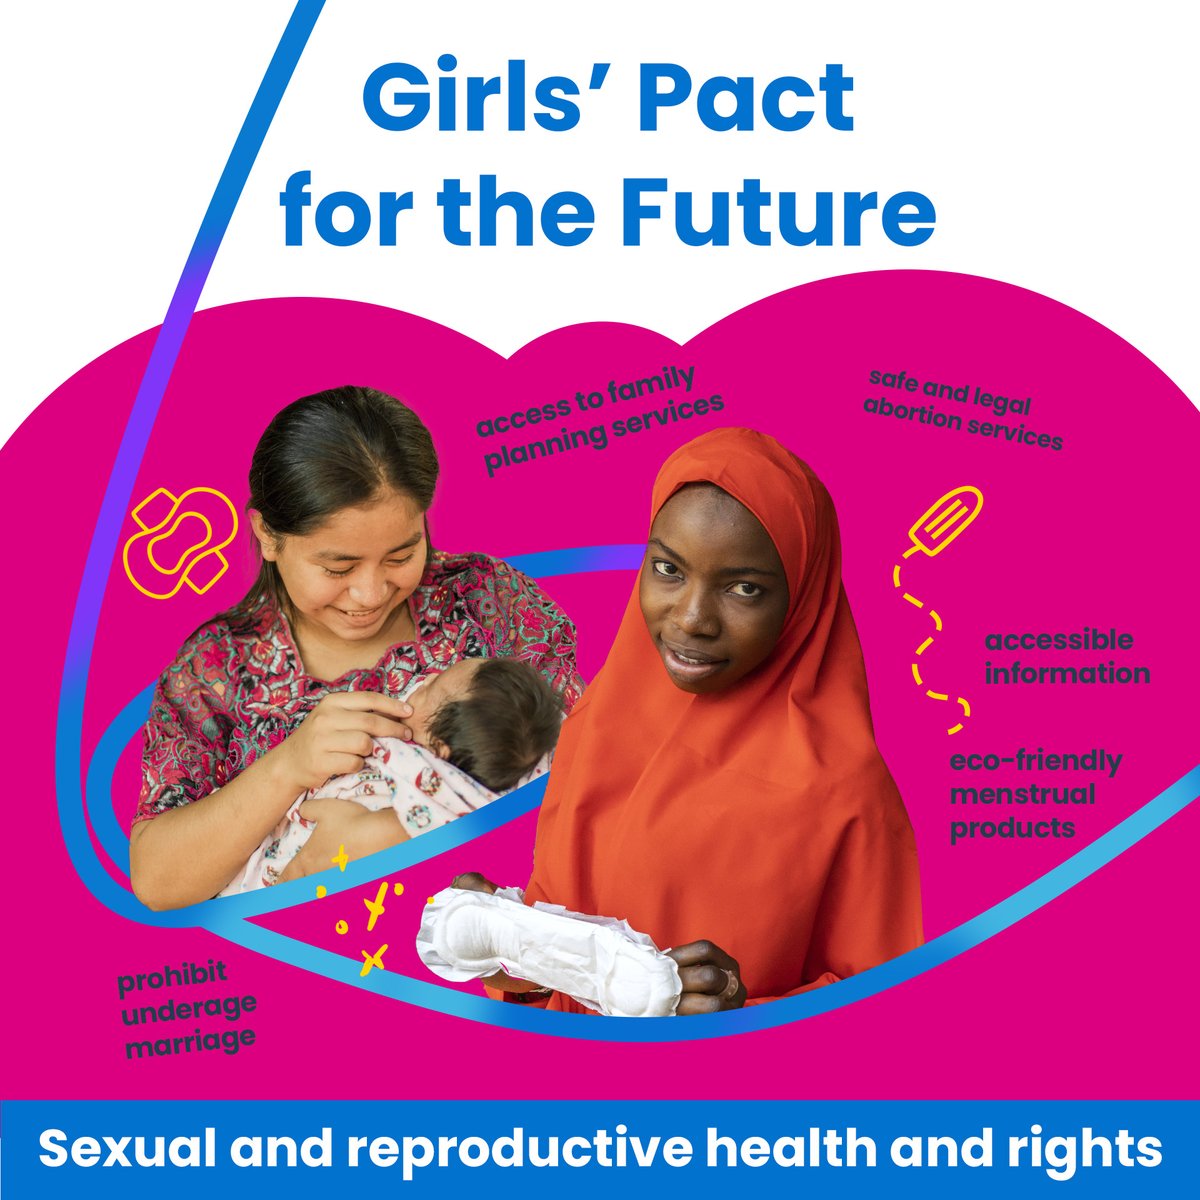 The #FutureGirlsWant is one where all young people have access to youth-friendly sexual and reproductive health services. In the Girls’ Pact for the Future, they’re calling on global leaders to remove barriers such as cost, stigma, and lack of information.